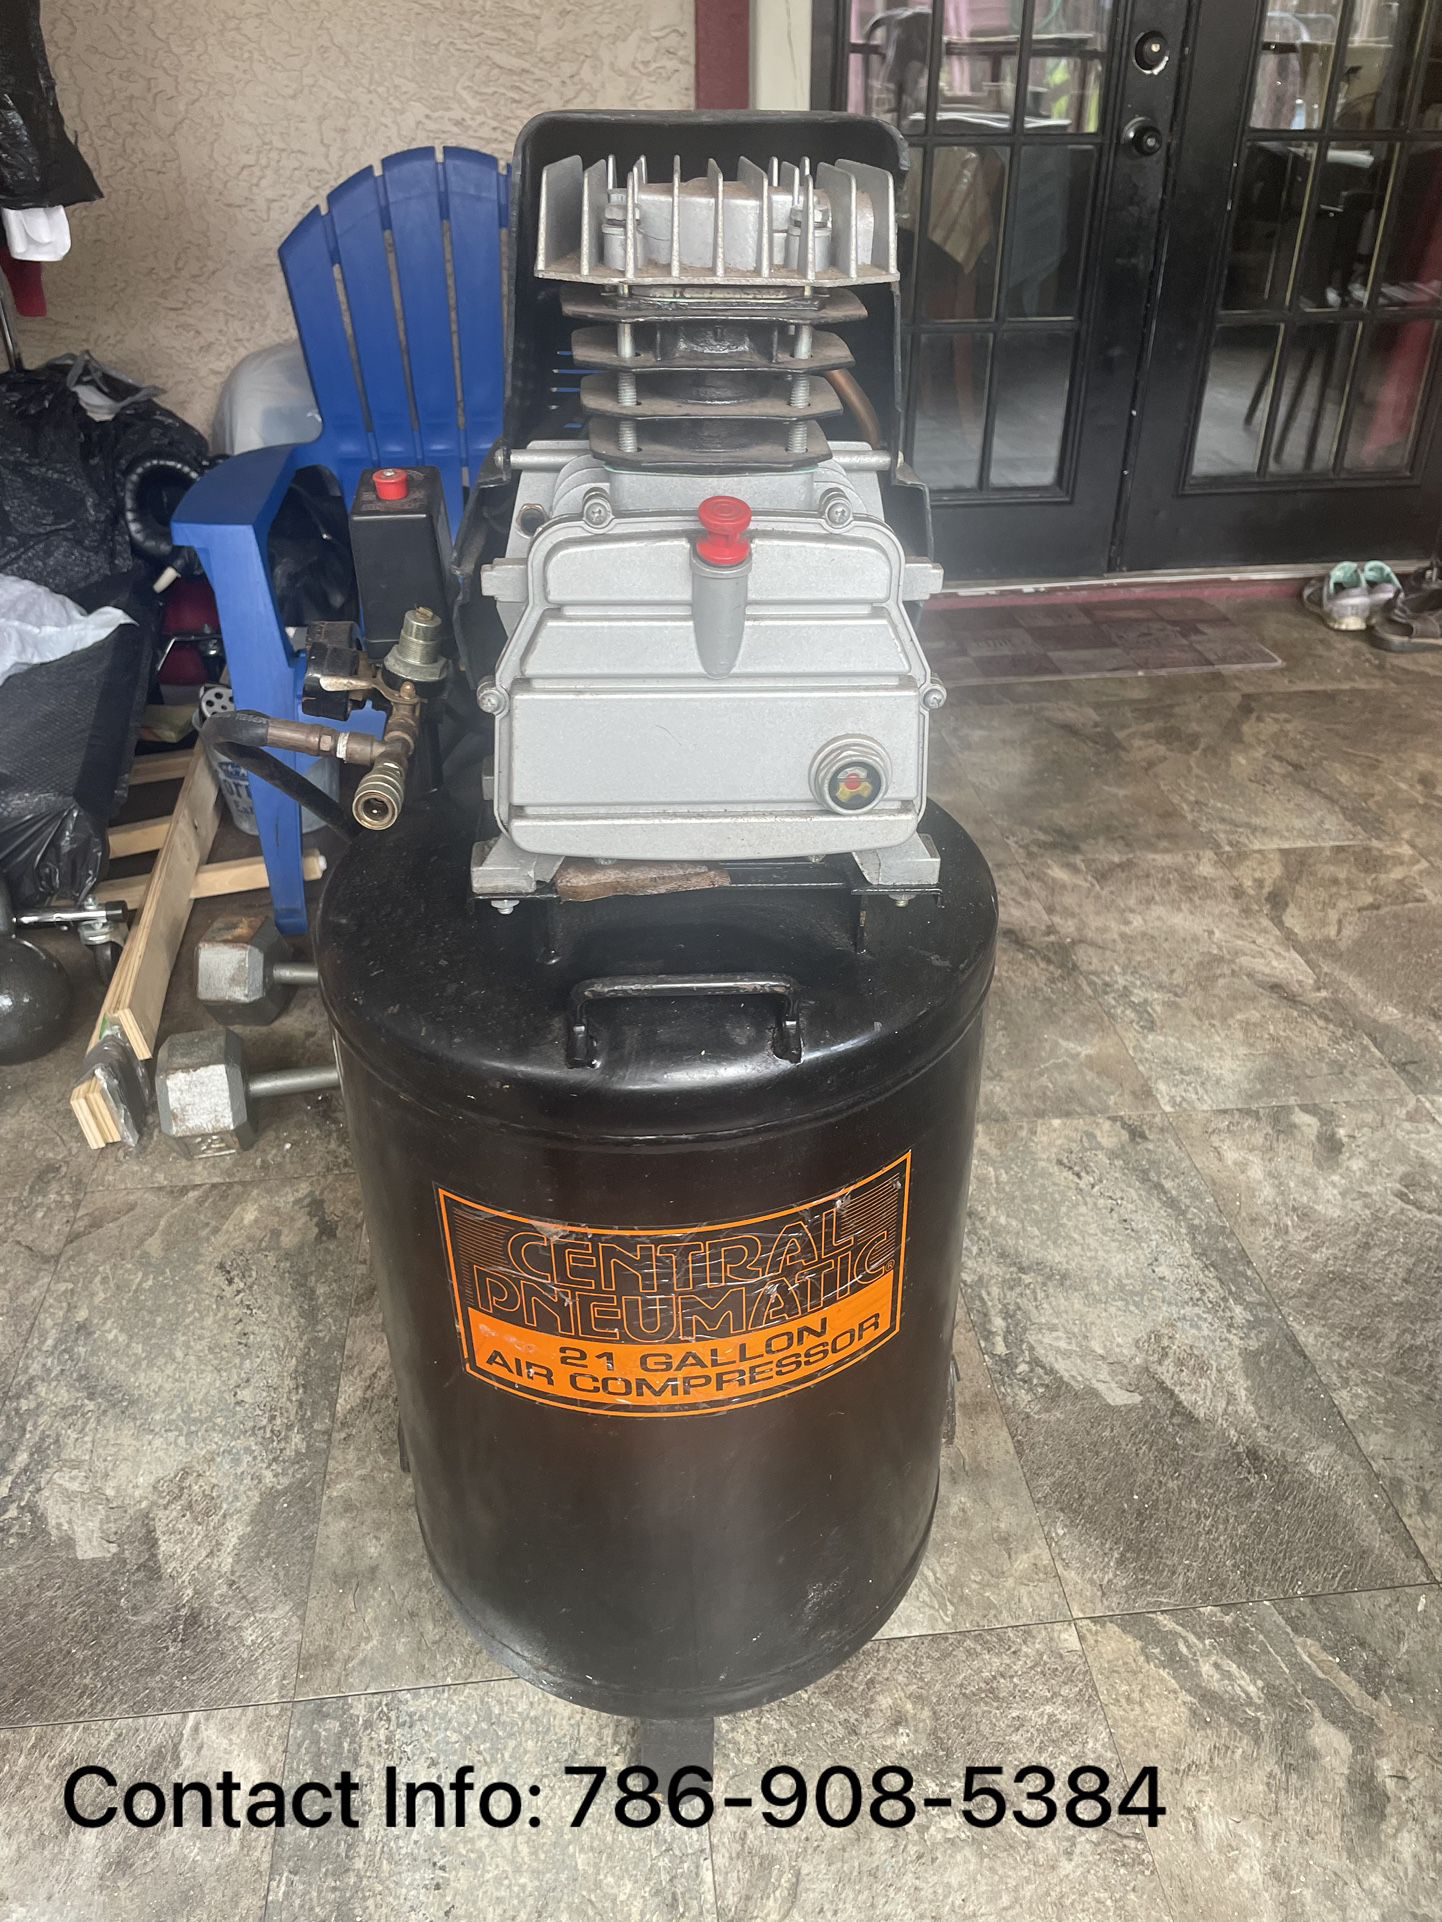 21 Gallon Air Compressor. Contact Number Below Photo For More Info.